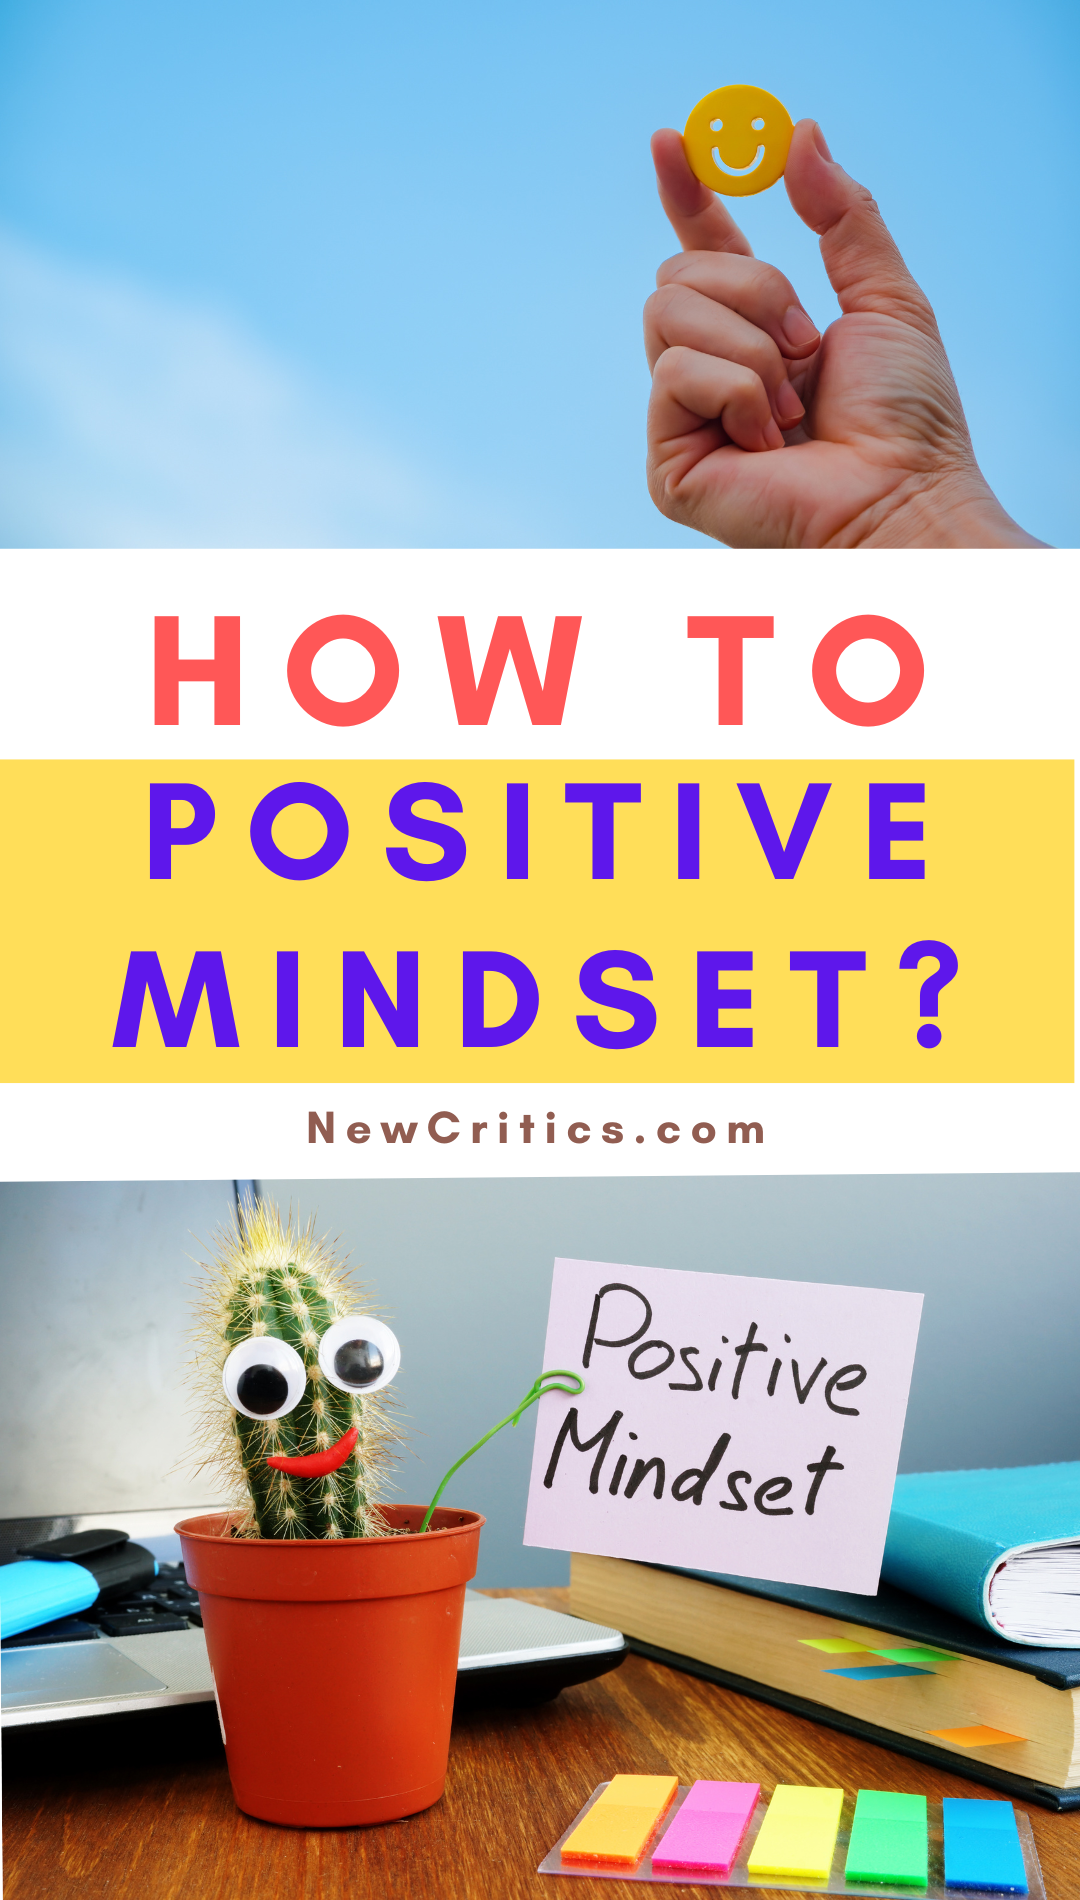 How To Positive Mindset / Canva